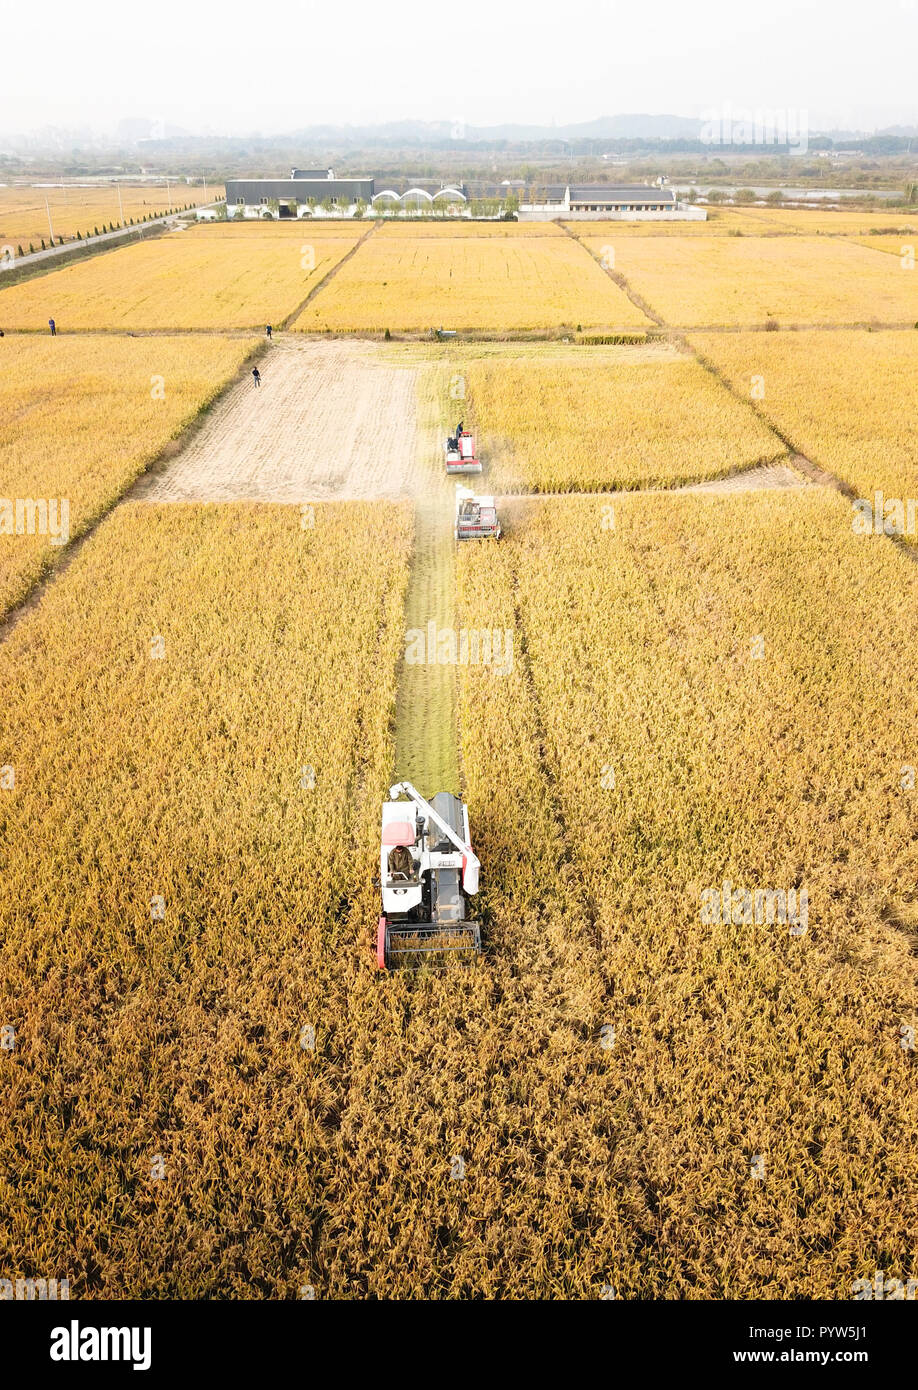 Huzhou. 30th Oct, 2018. Aerial photo taken on Oct. 30, 2018 shows harvesters reaping rice in a field at Qianshanxia Village in Wuxing District of Huzhou City, east China's Zhejiang Province. Since 2016, the cooperative has explored to develop recycling agriculture by organically incorporating rice planting with sheep breeding. Credit: Weng Xinyang/Xinhua/Alamy Live News Stock Photo